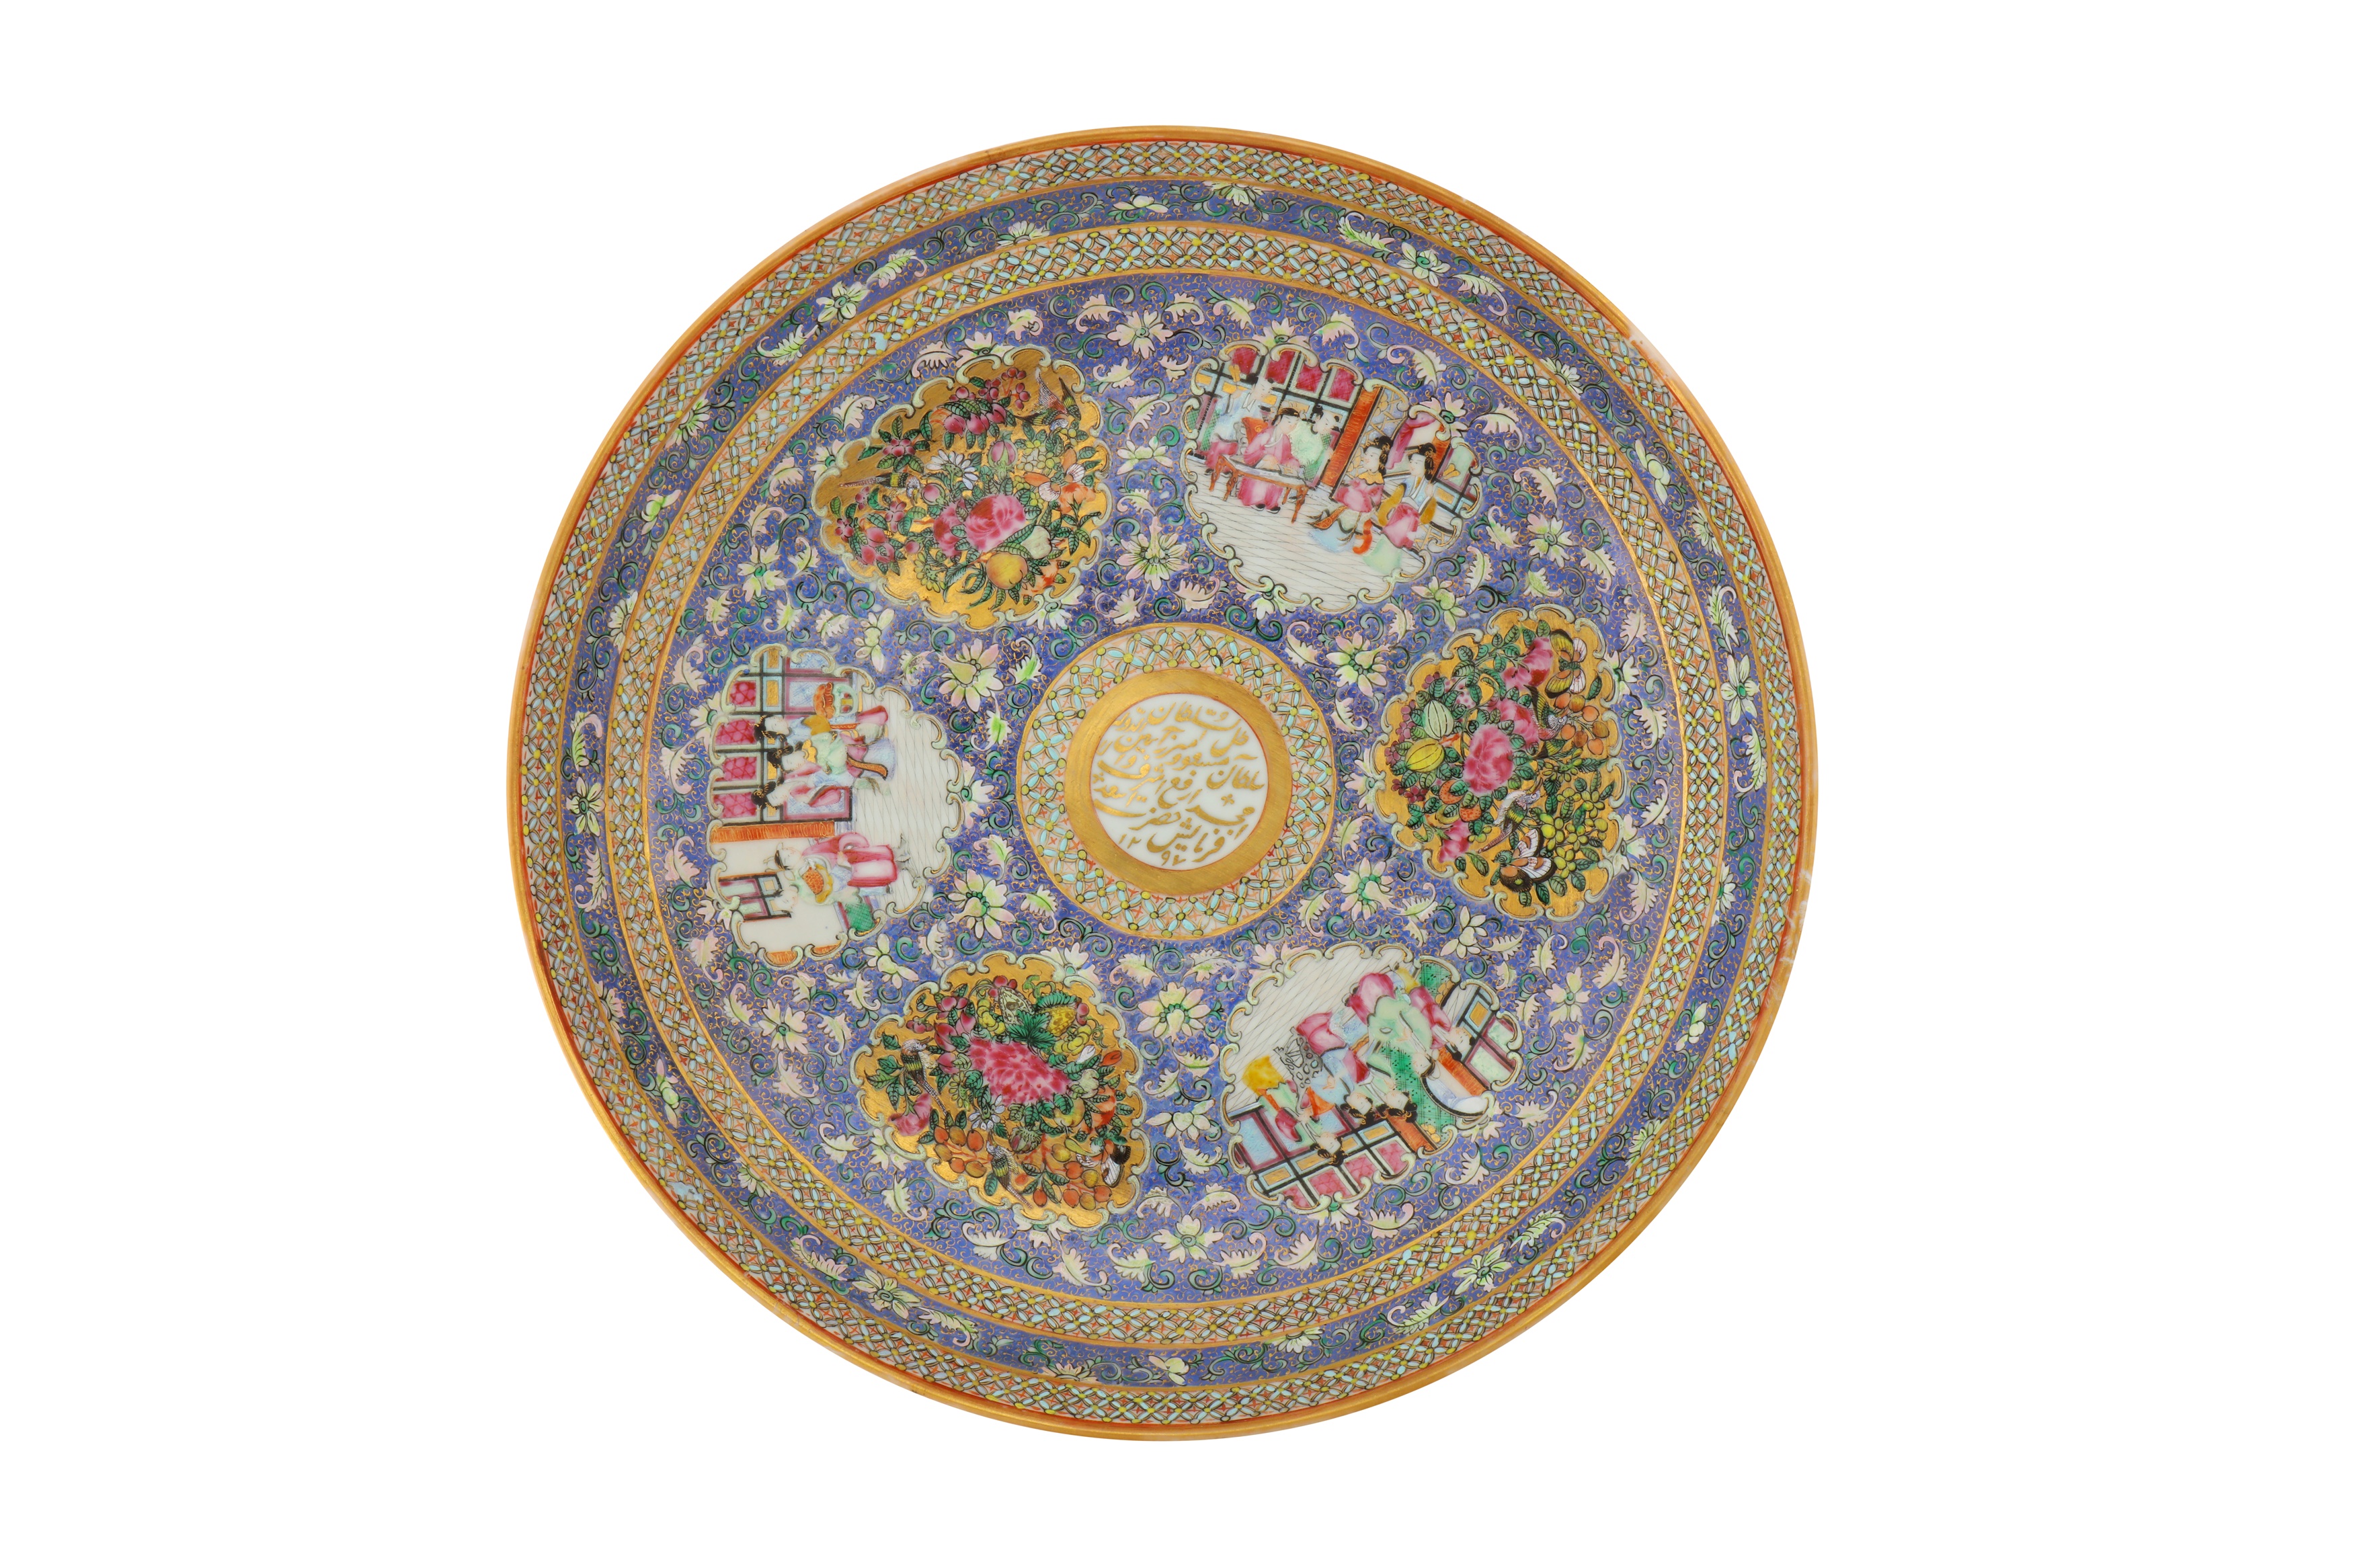 A LARGE BOWL AND DISH FROM THE ZILL AL-SULTAN CANTON PORCELAIN SERVICE - Image 8 of 8